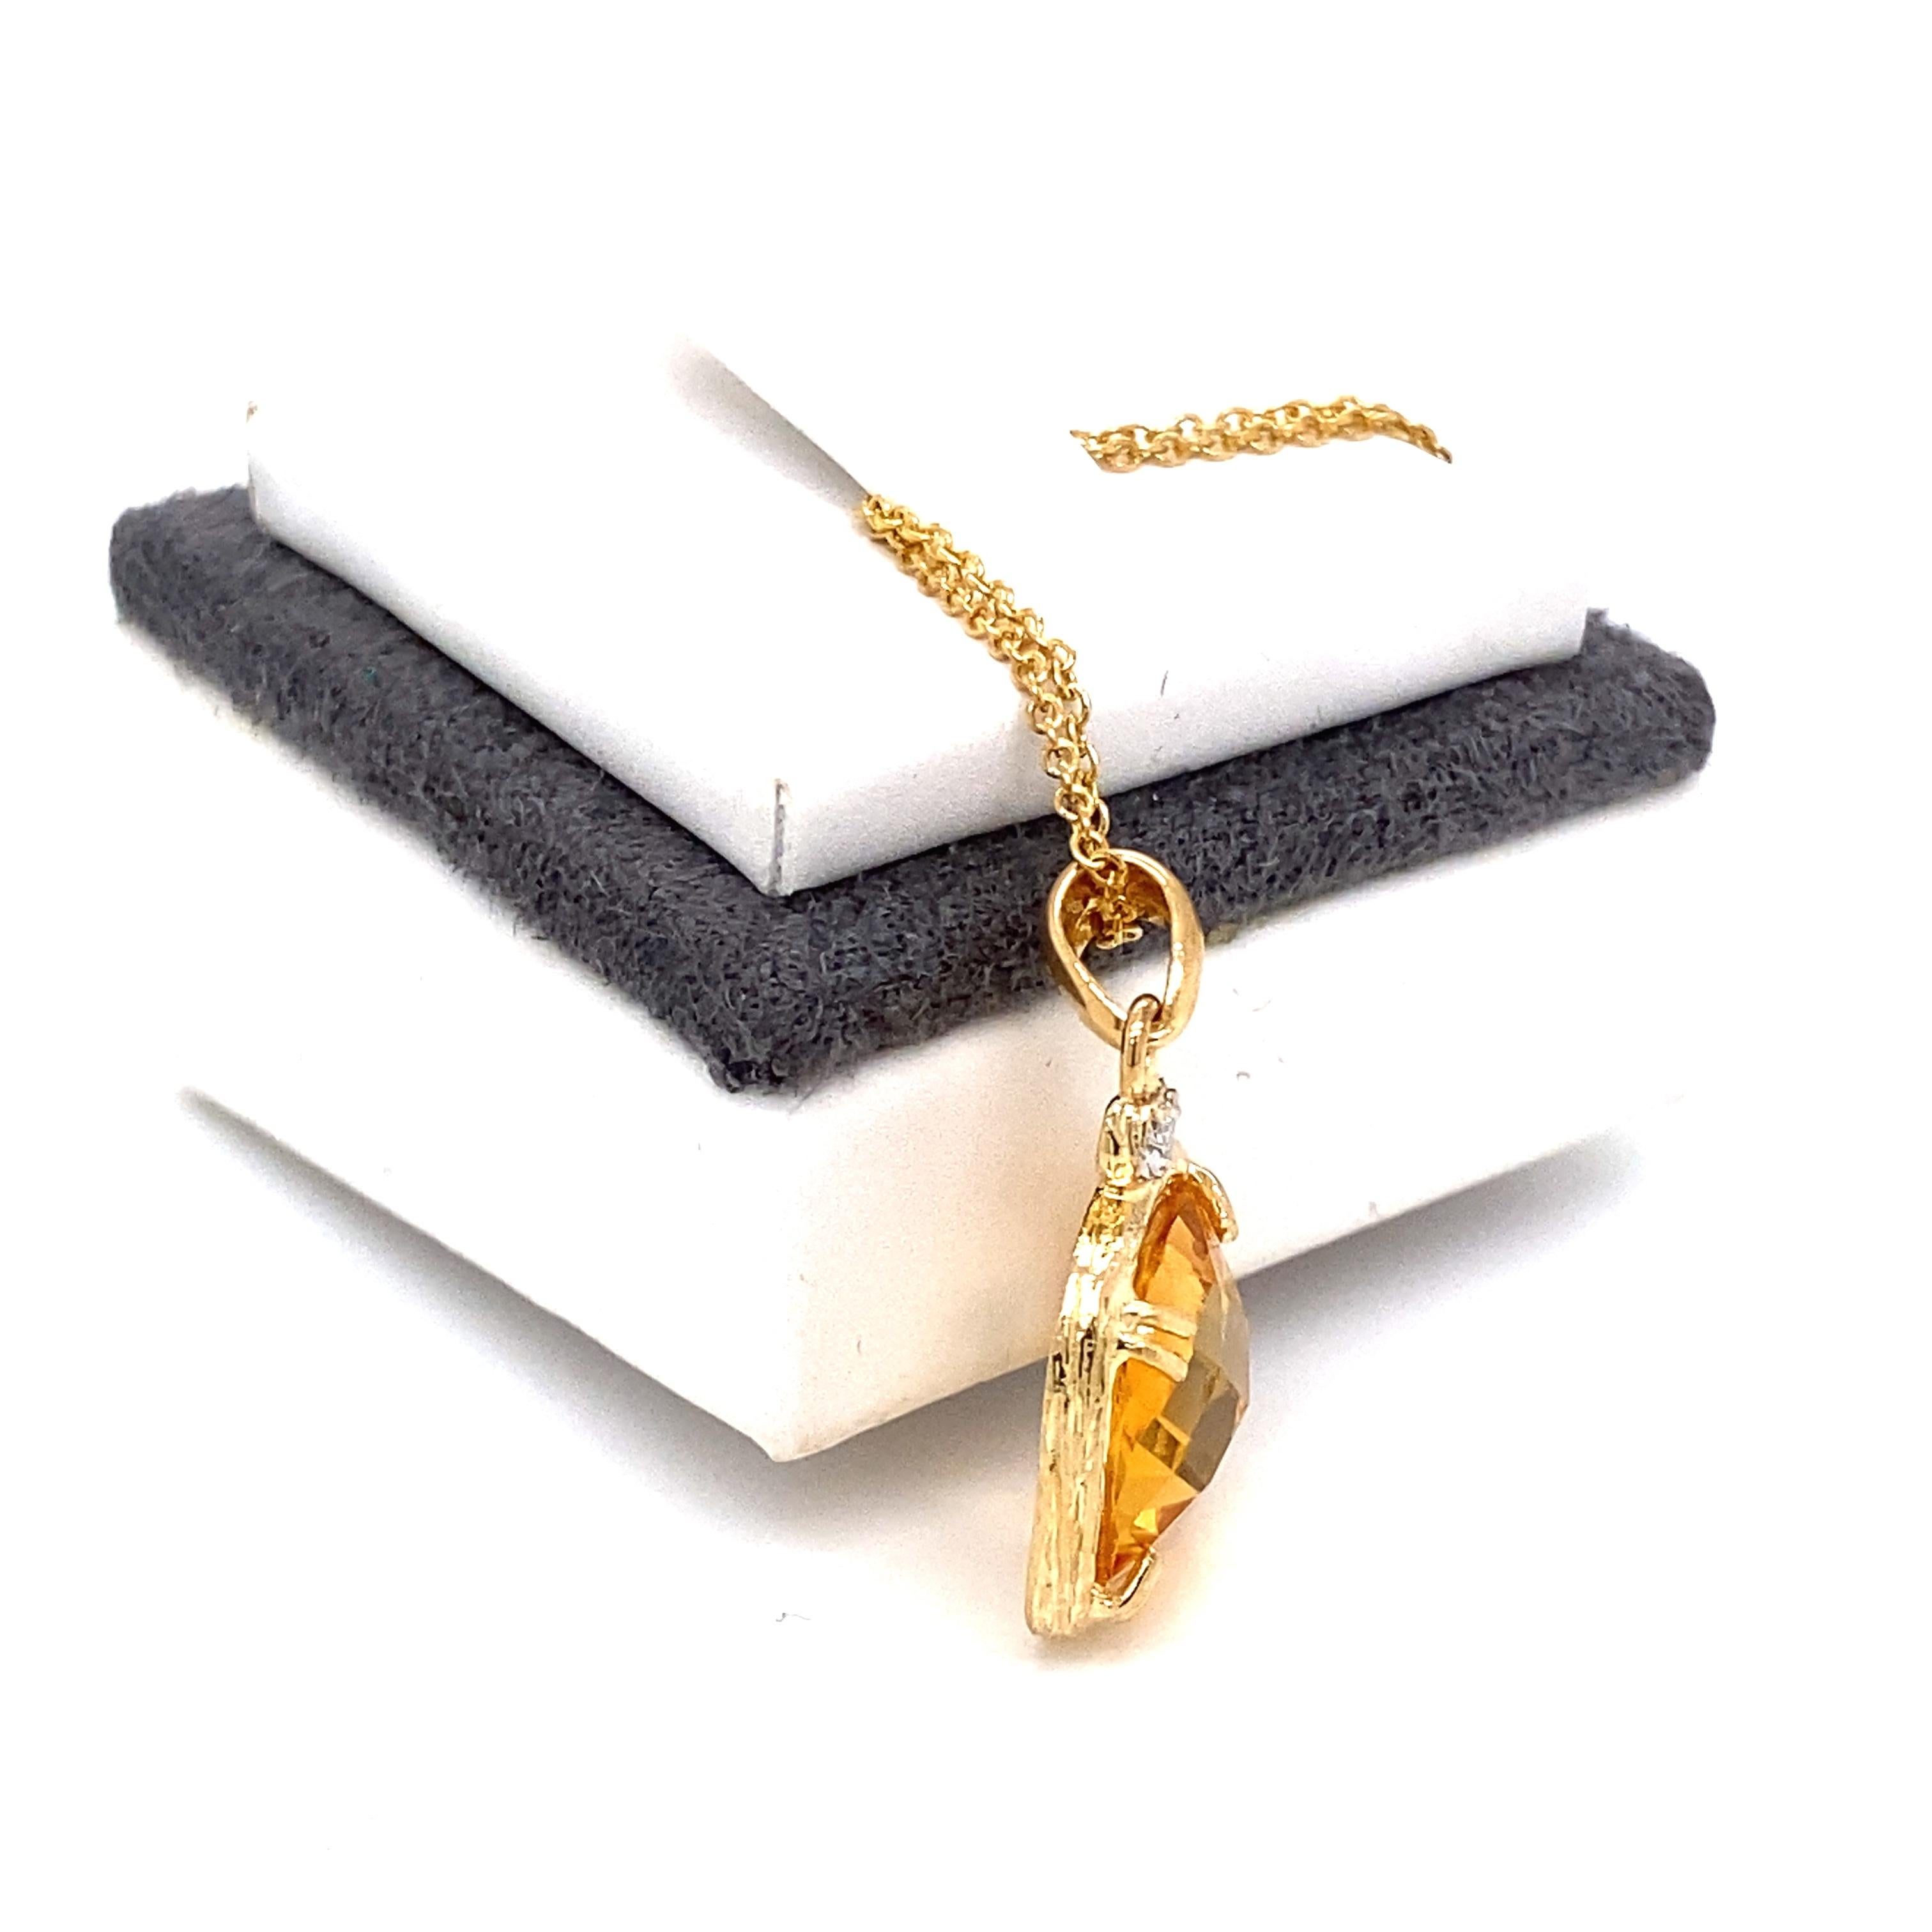 14 Karat Yellow Gold Hand-Crafted Polish and Textured-Finished 10mm Checkerboard Cushion-Cut Citrine Semi-Precious Color Stone Pendant, Accented with 0.02 Carats of a Bezel Set Diamond, Sliding on a 16